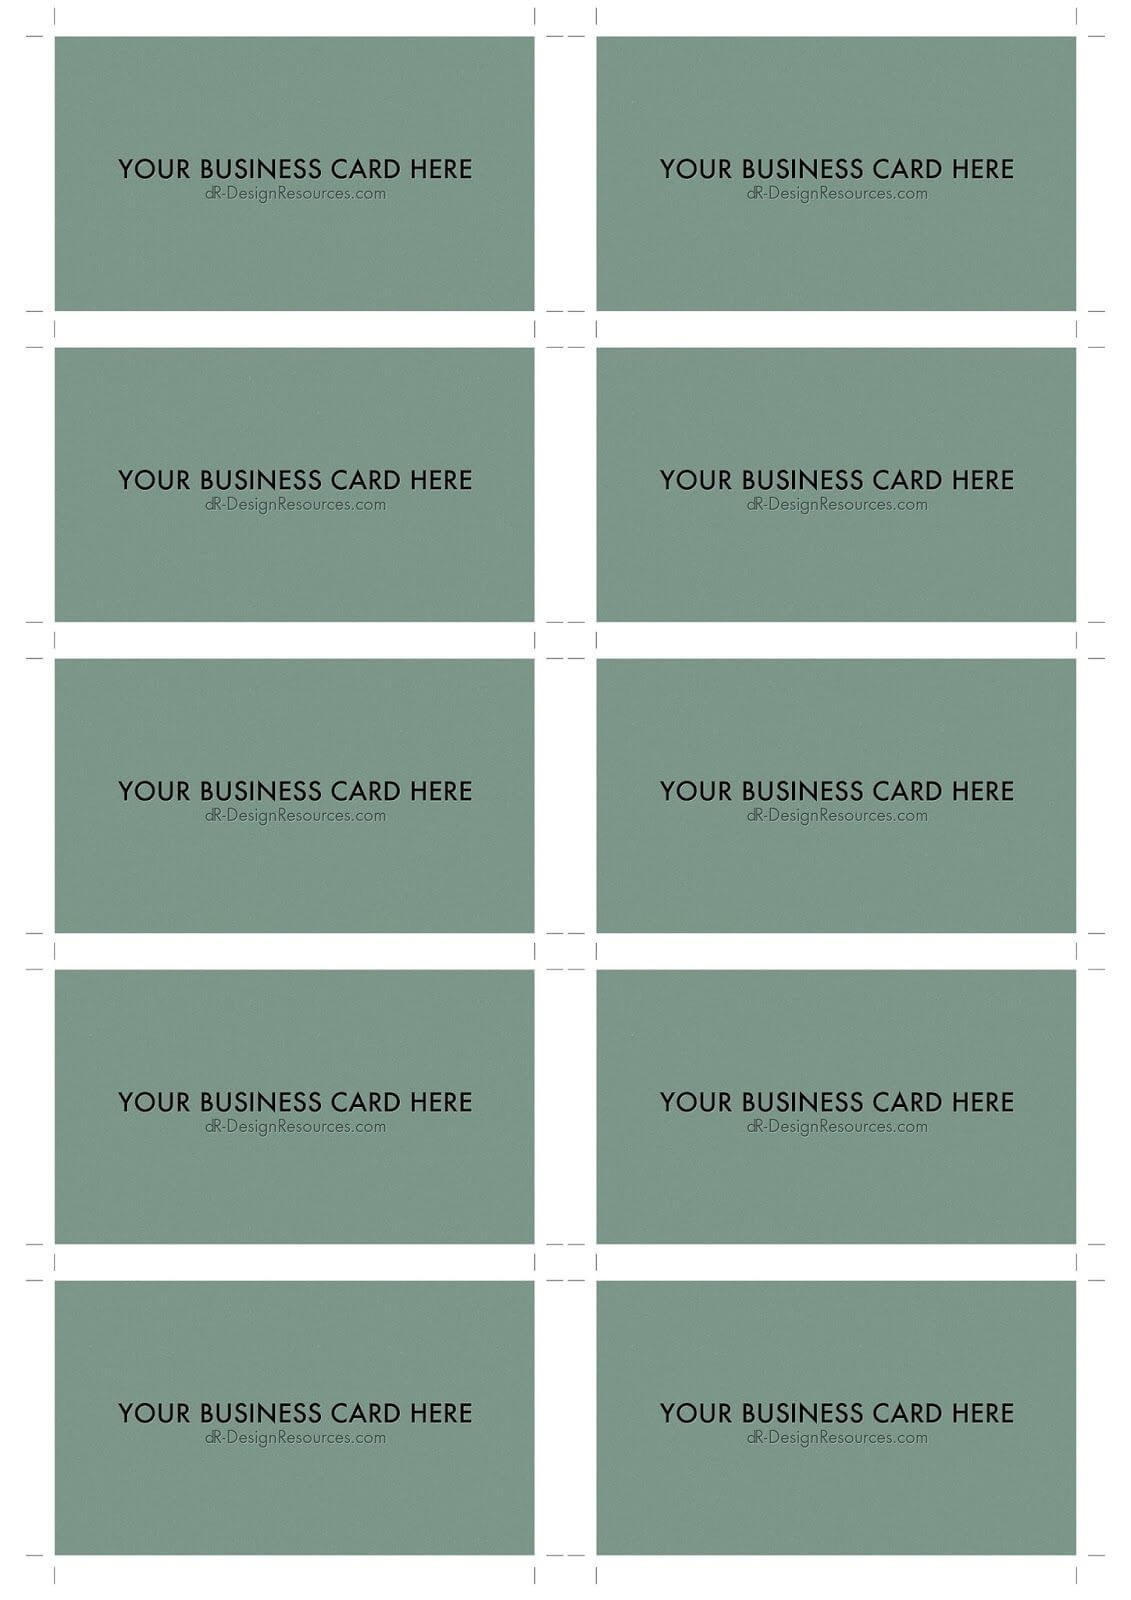 A4 Business Card Template Psd (10 Per Sheet) | Business Card With Regard To Photoshop Business Card Template With Bleed